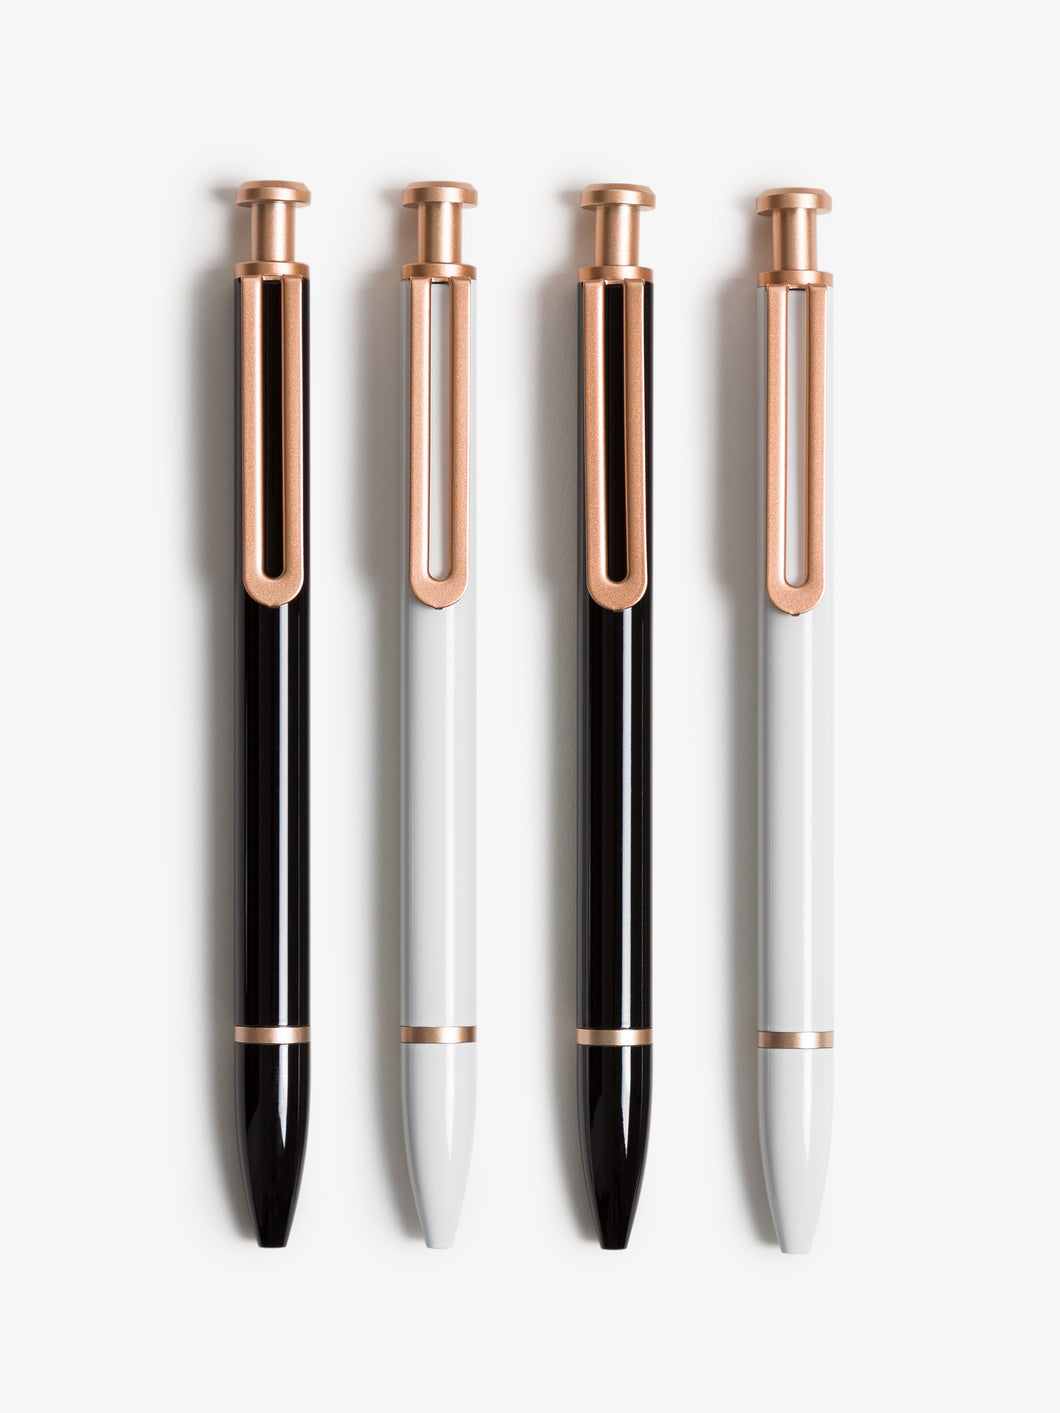 U Brands Monterey Ballpoint Pens - White & Black with Rose Gold Accents, Set of 4